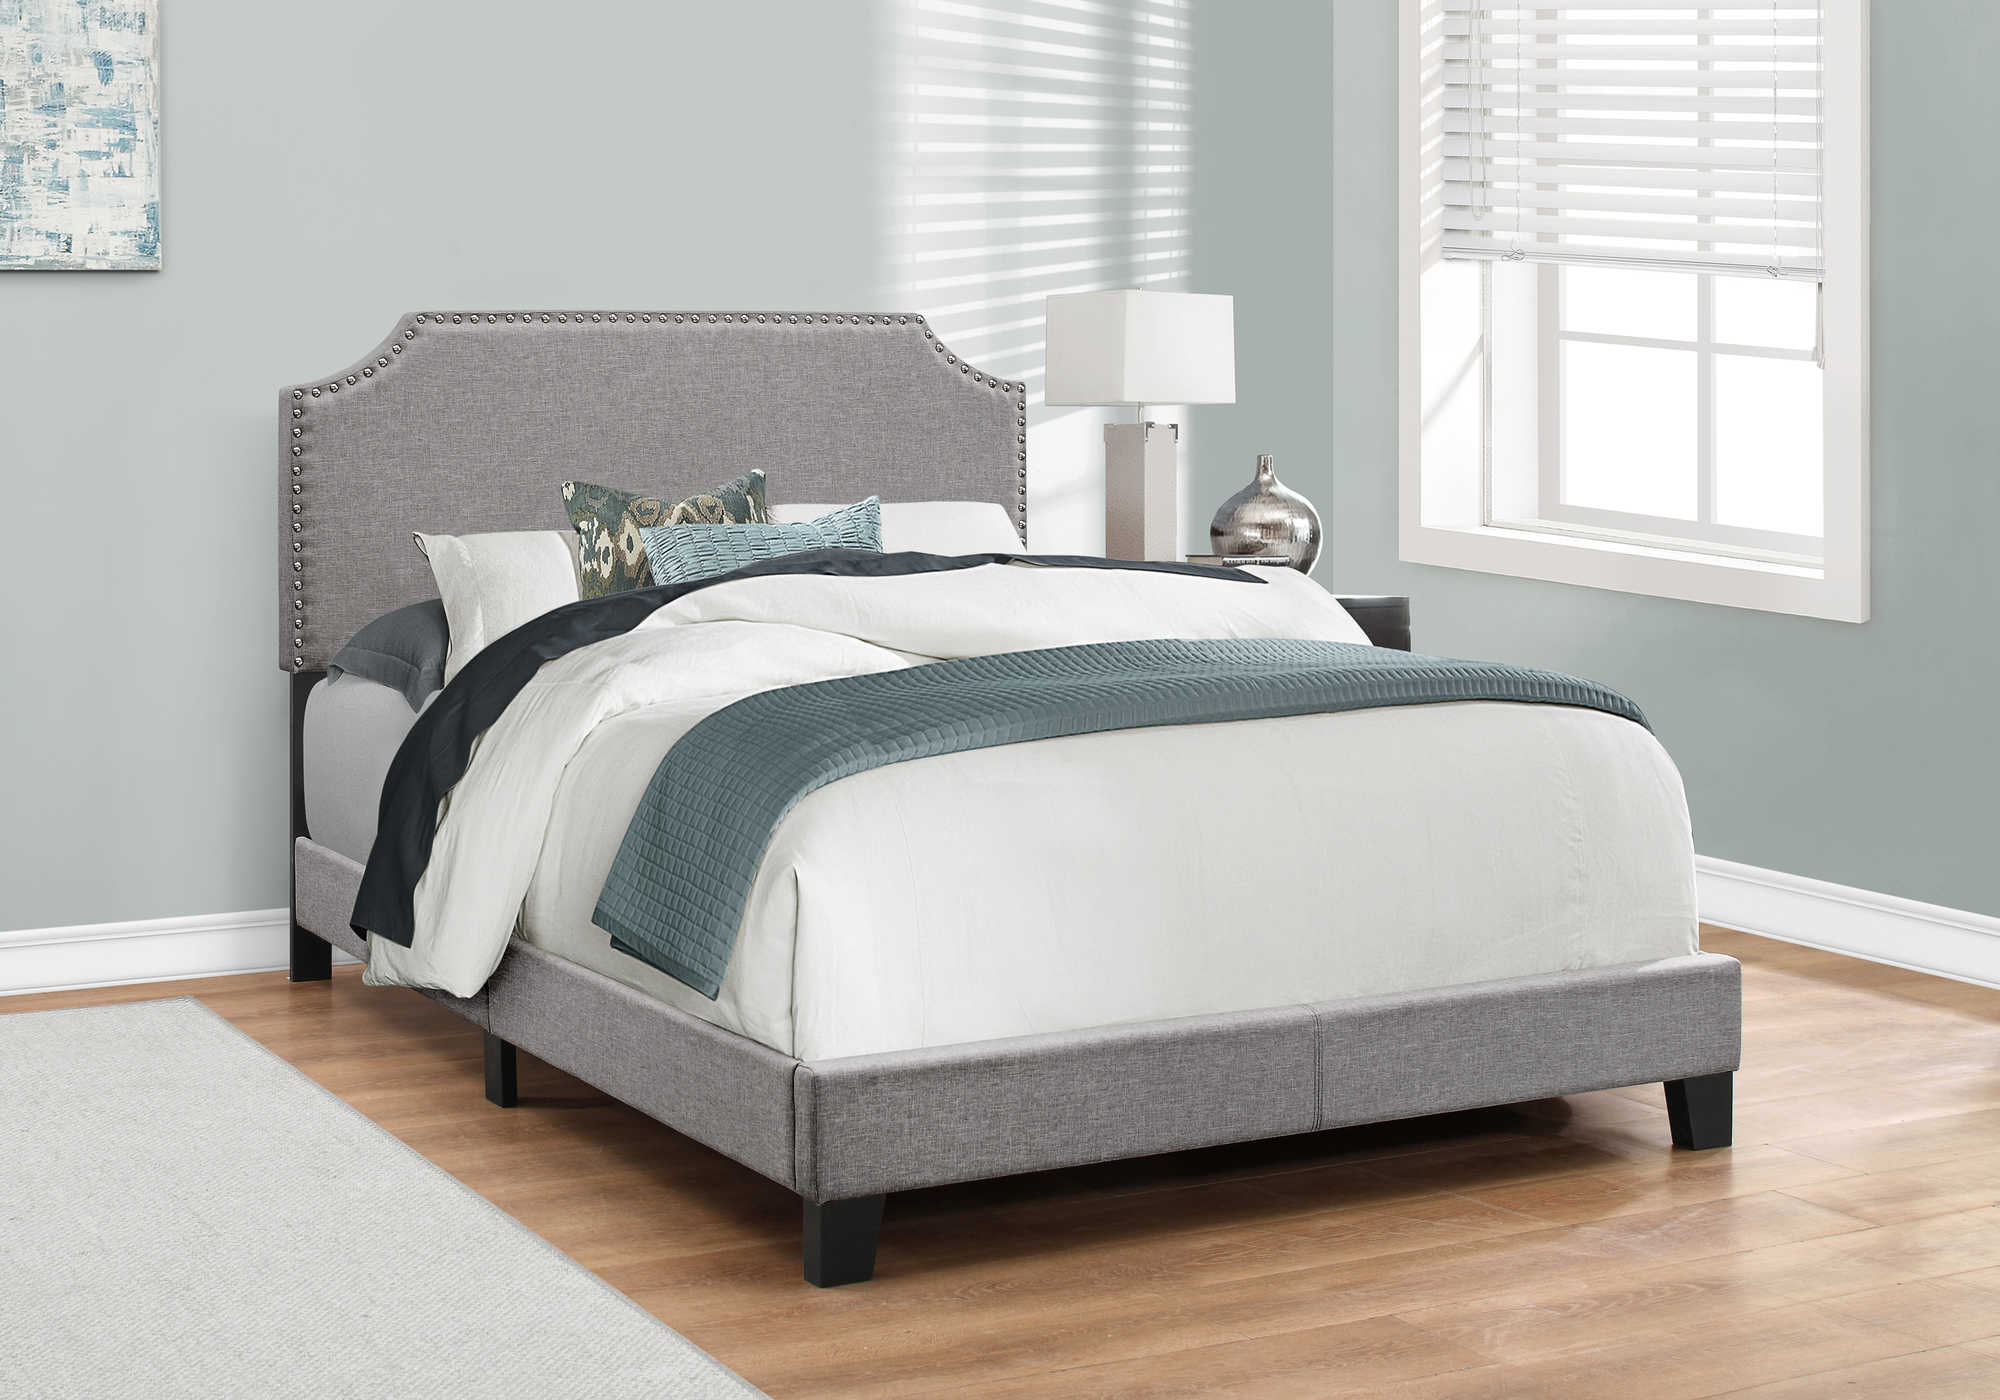 BED - FULL SIZE / GREY LINEN WITH CHROME TRIM